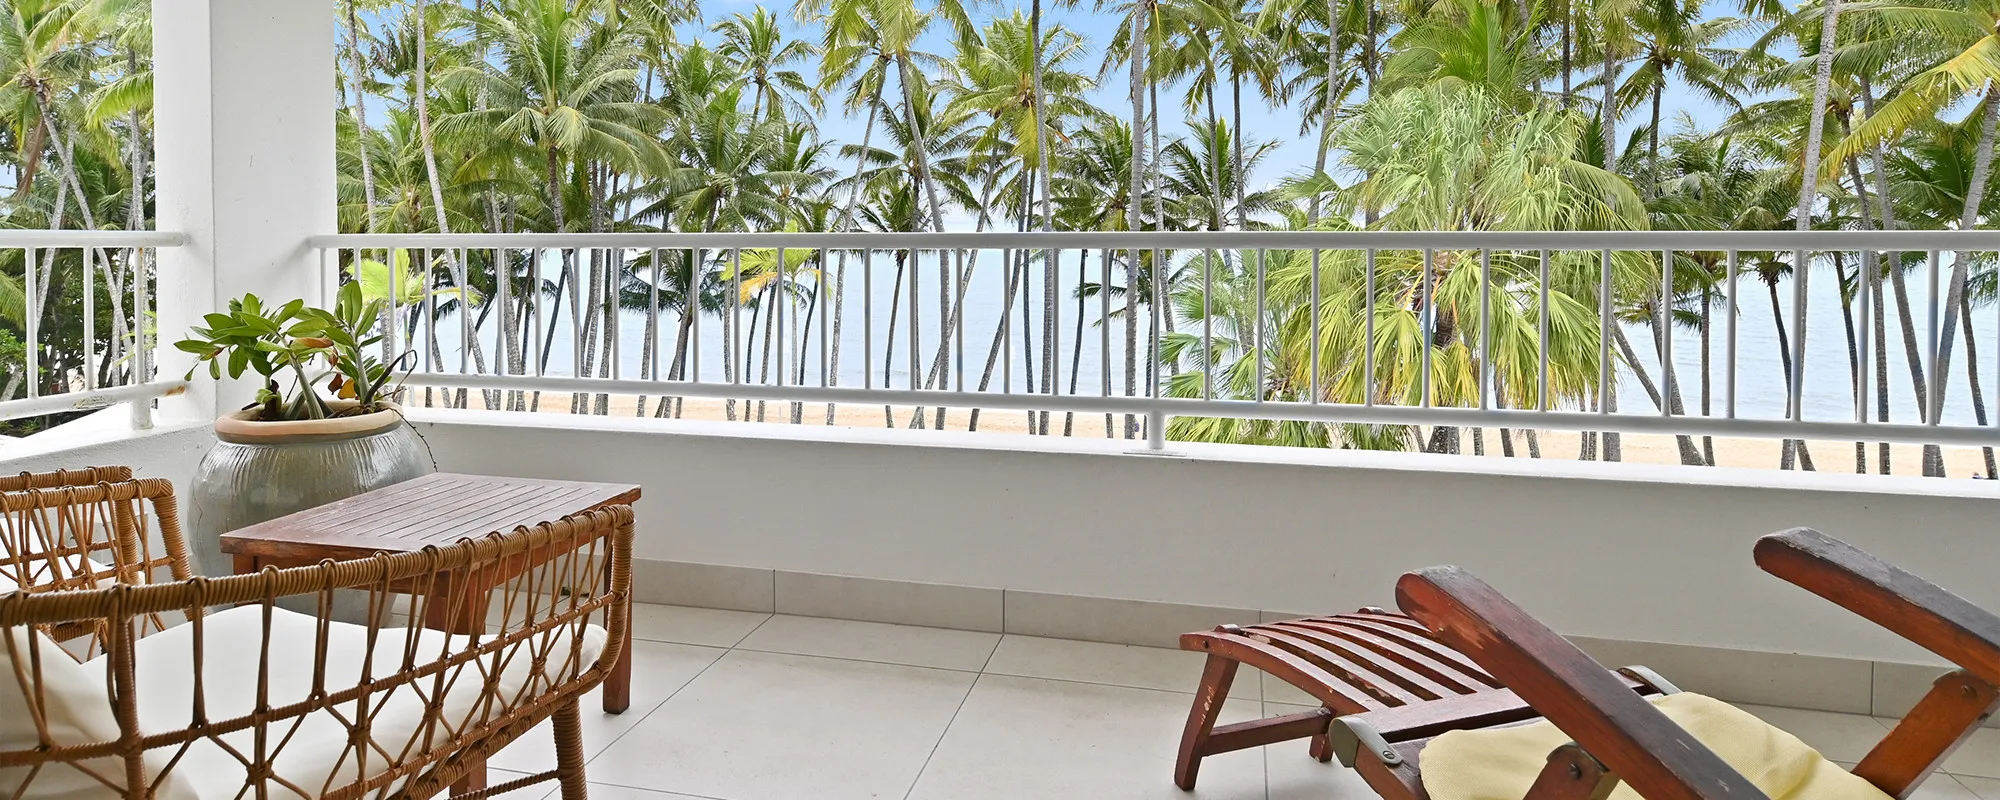 Alamanda Palm Cove by Lancemore Boutique Luxury Accommodation Four Bedroom Apartment 2000 x 800 3